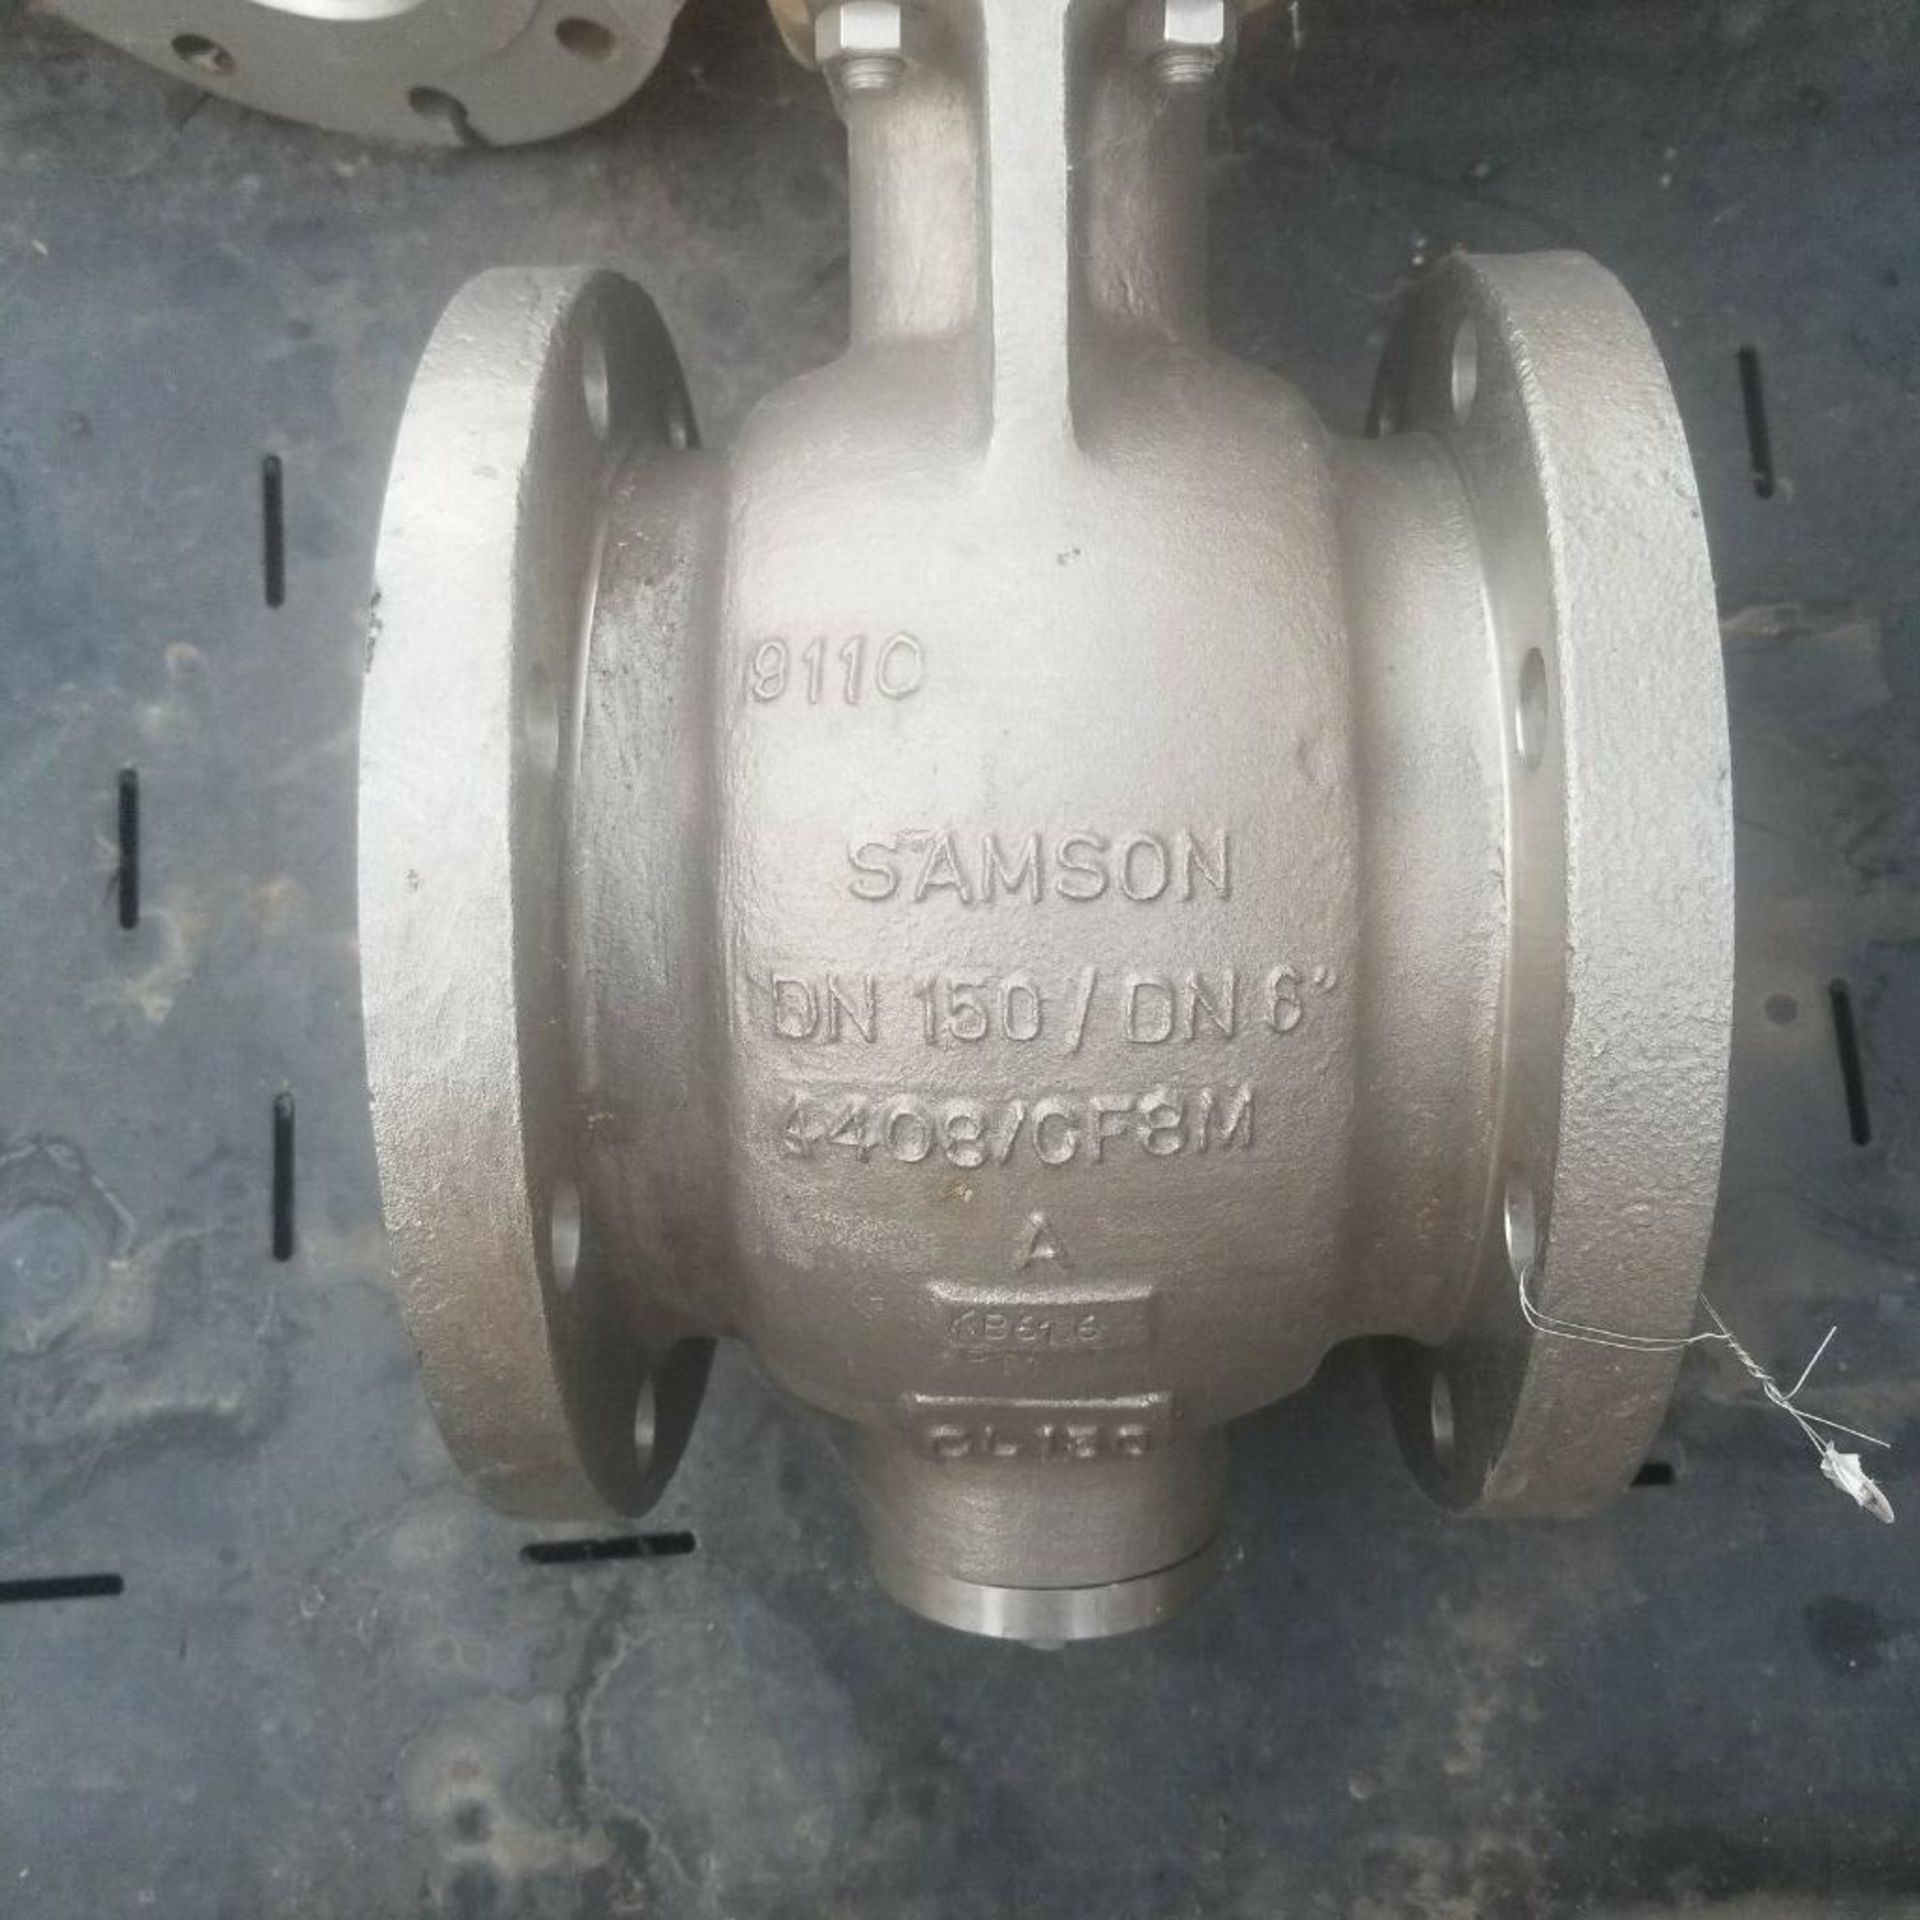 Samson 3310-06 stainless steel 6 in. segmented air operated b valve, v-b - Image 19 of 20